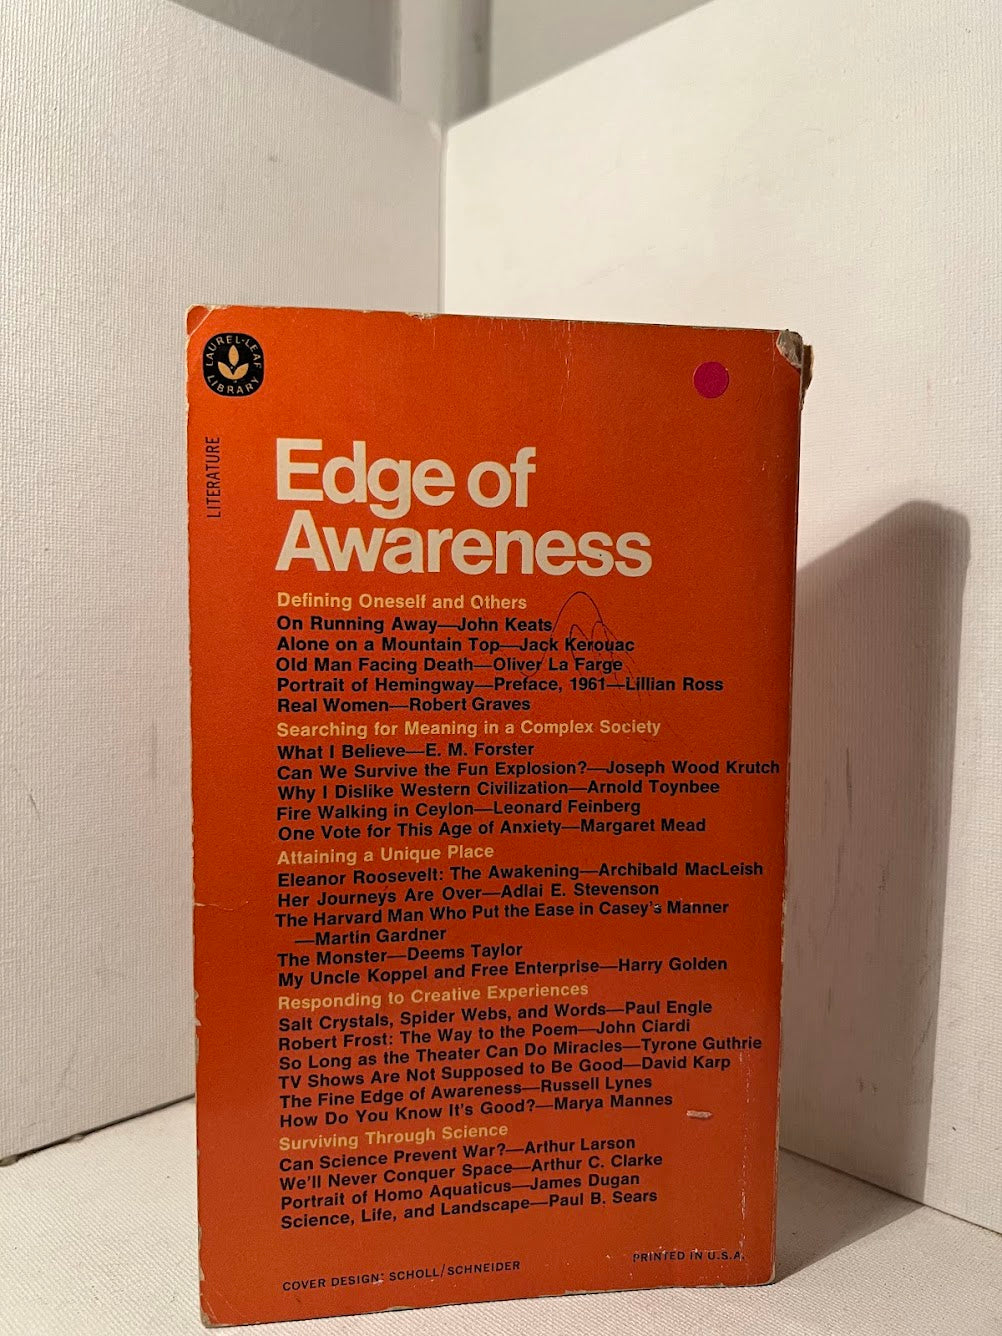 Edge of Awareness (25 Contemporary Essays) edited by Ned E. Hoopes and Richard Peck